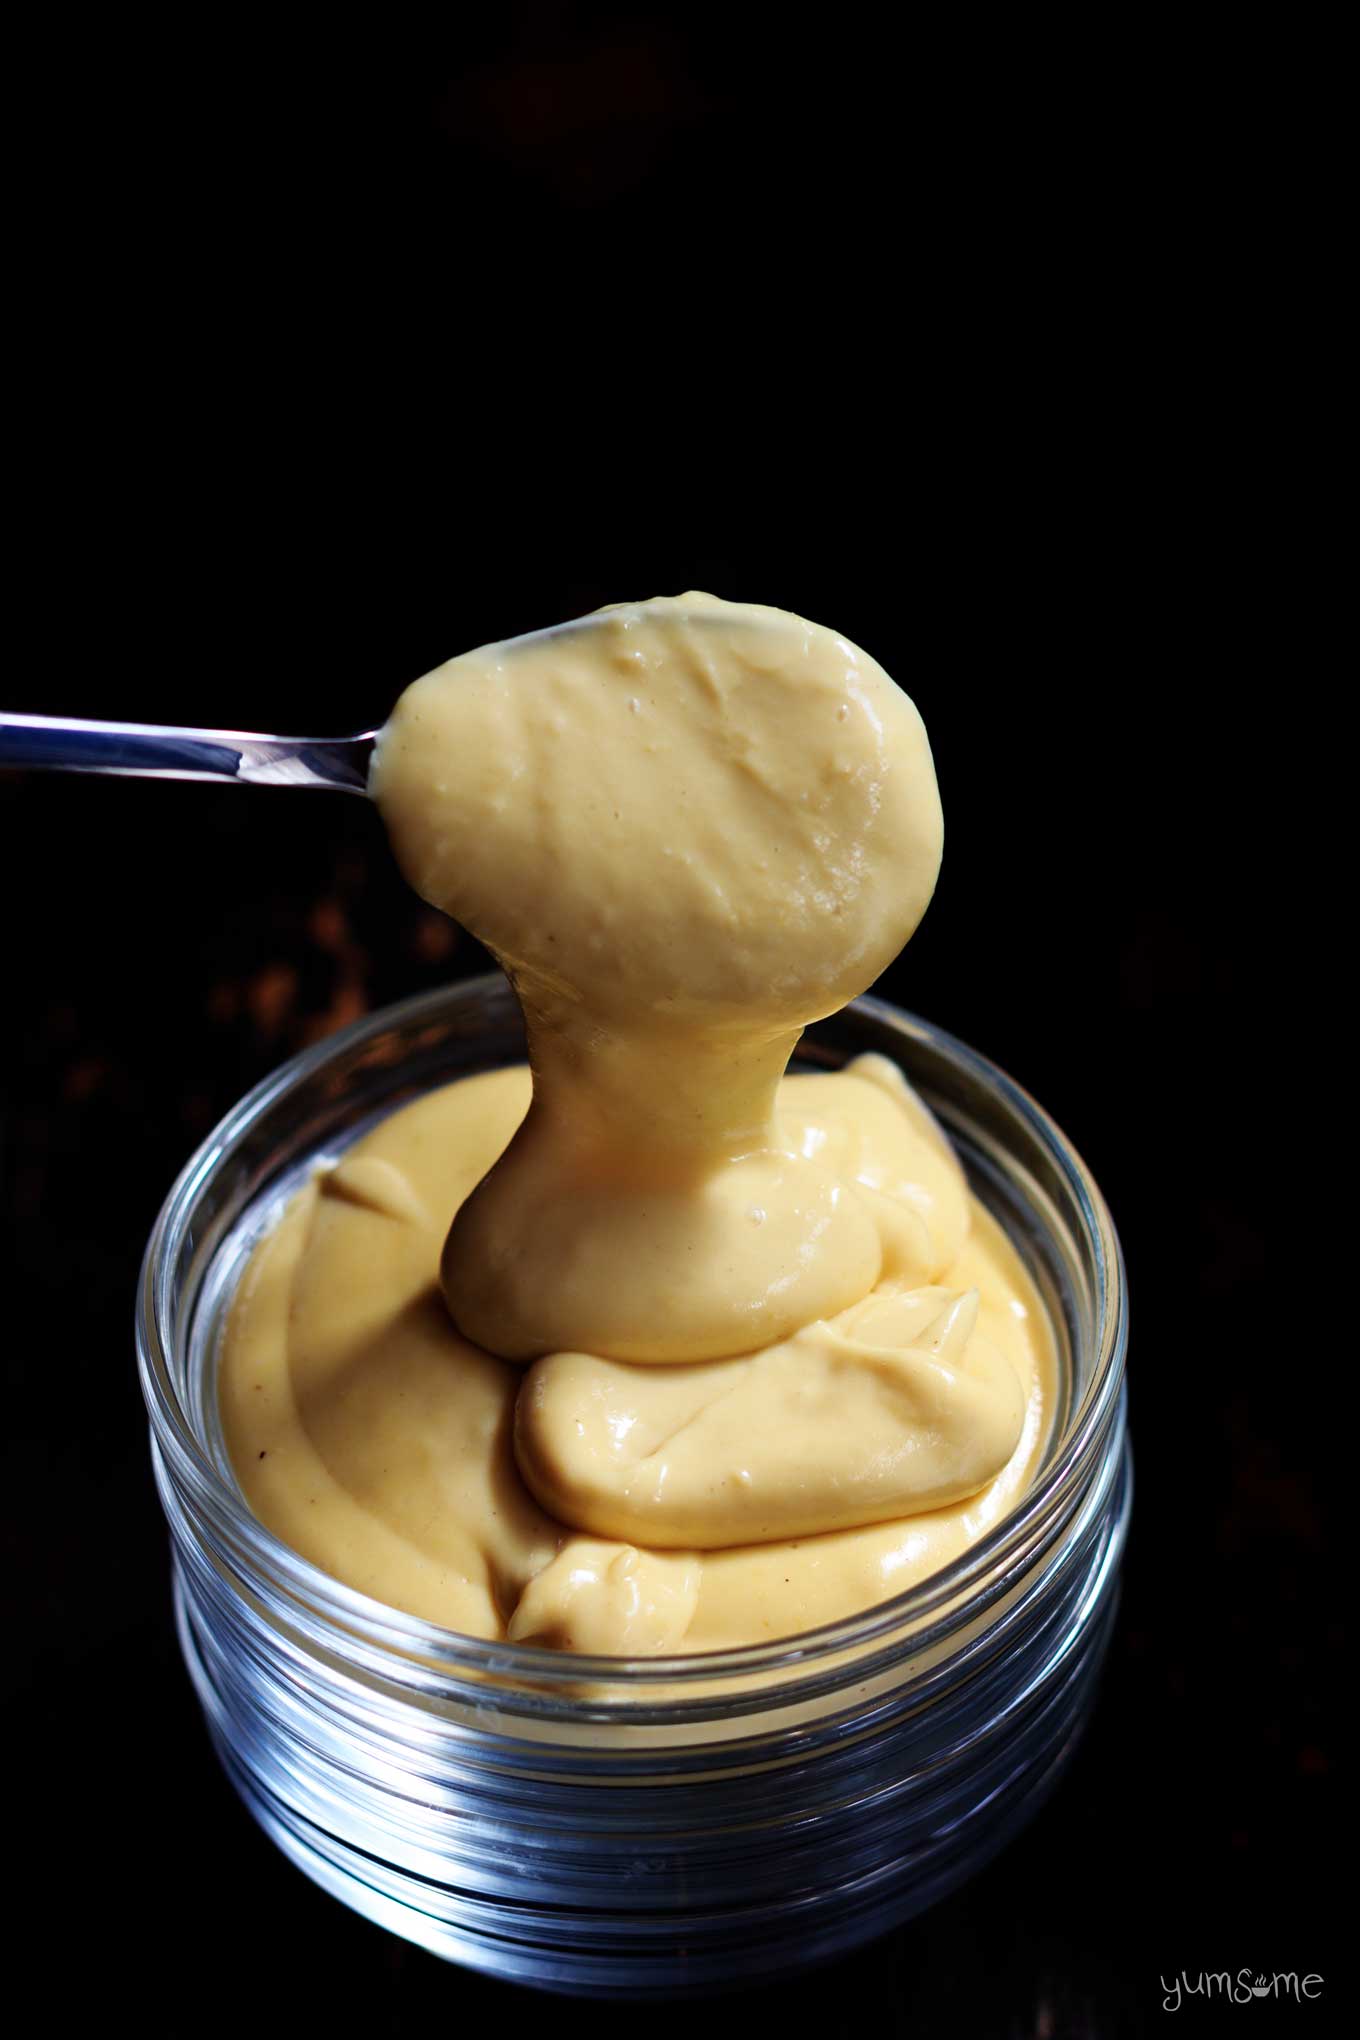 vegan cheese sauce dripping off a spoon | yumsome.com